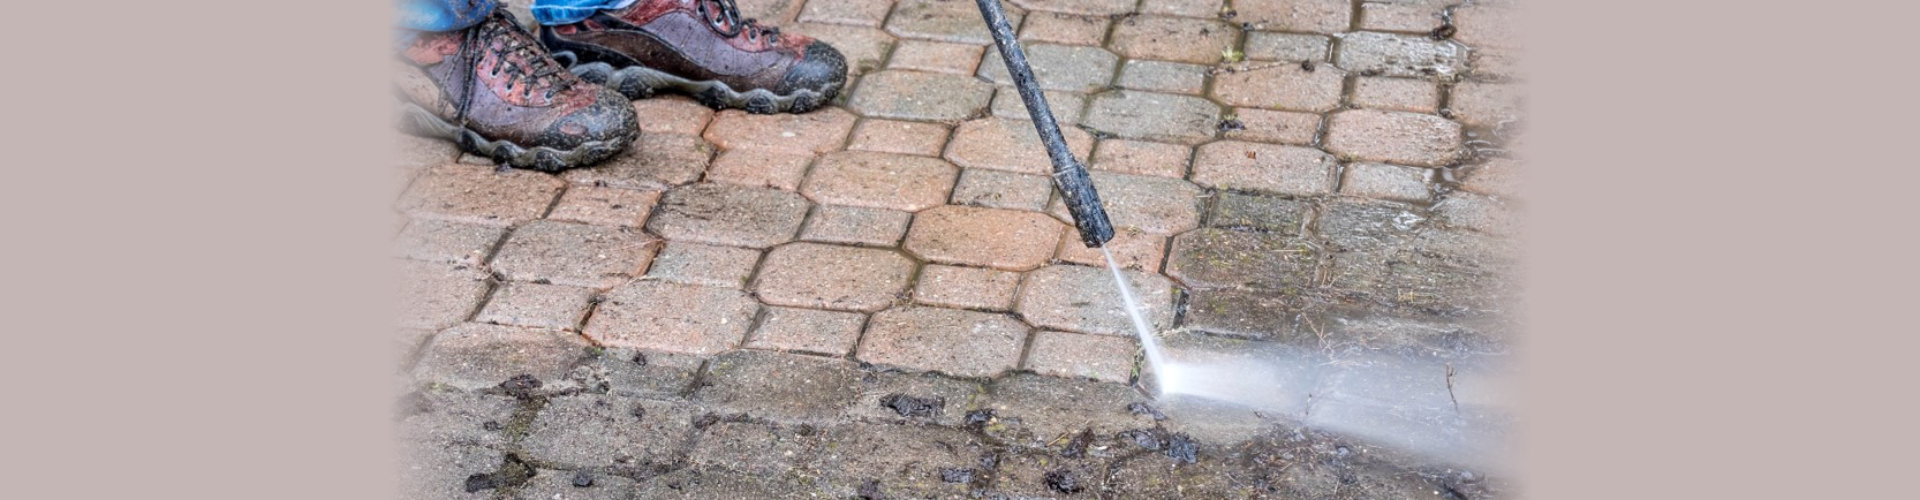 cleaning dirt using pressurized water